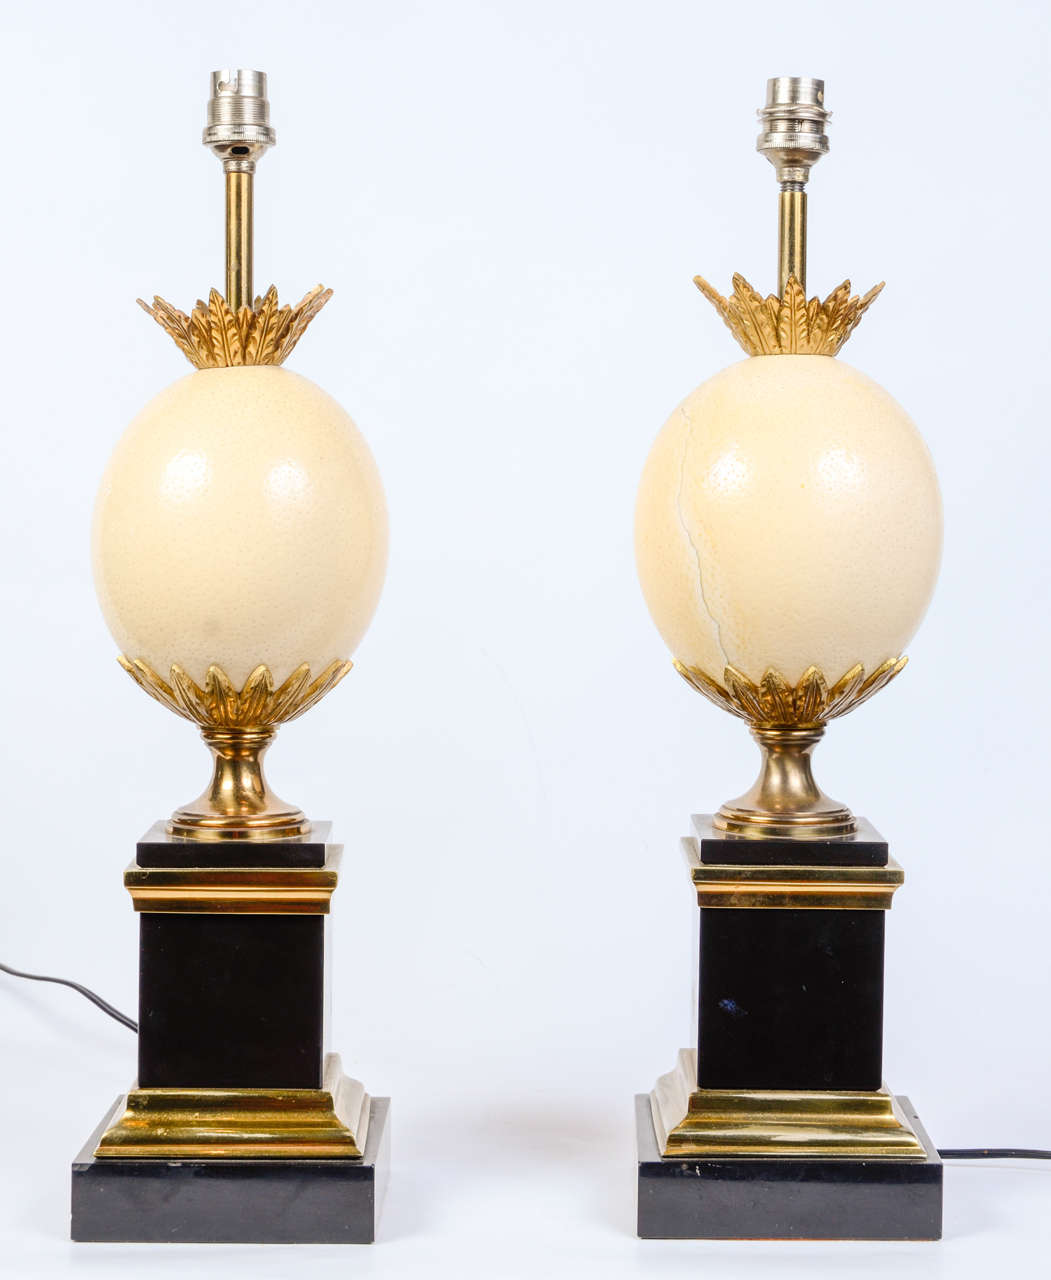 Rare pair of lamps made by the renown french house: Maison Charles.
These pieces are the 